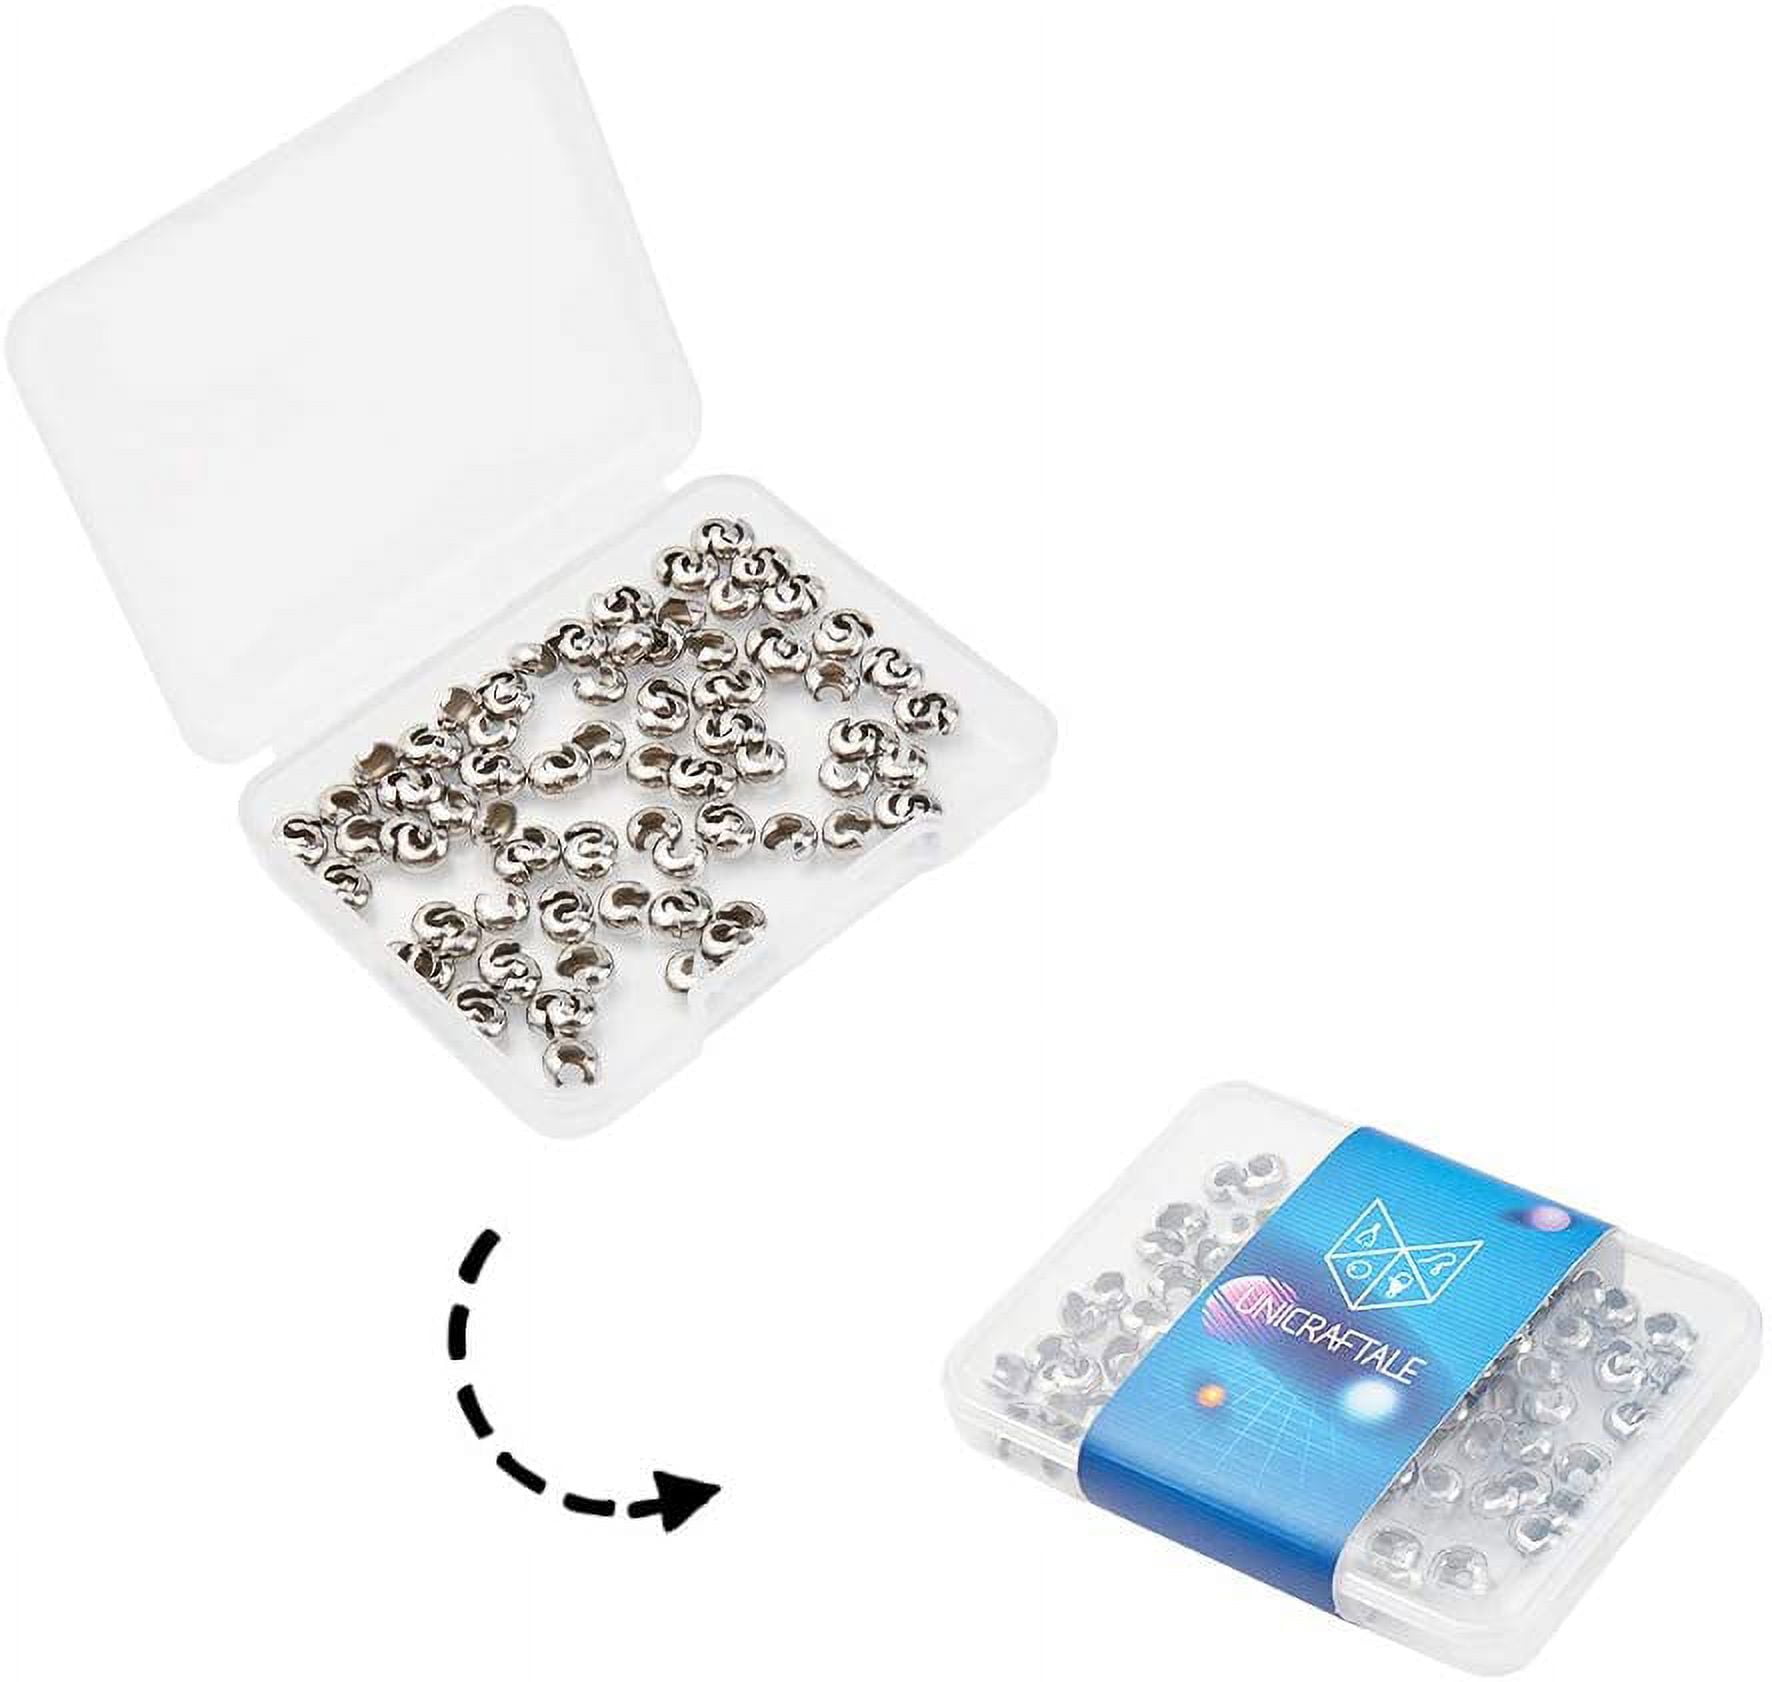 100pcs 3 mm Stainless Steel Crimp Bead Knot Covers Half Round Open Crimp  Beads Cover Clamp End Cap Tips with A Plastic Box for DIY Crafts Jewelry